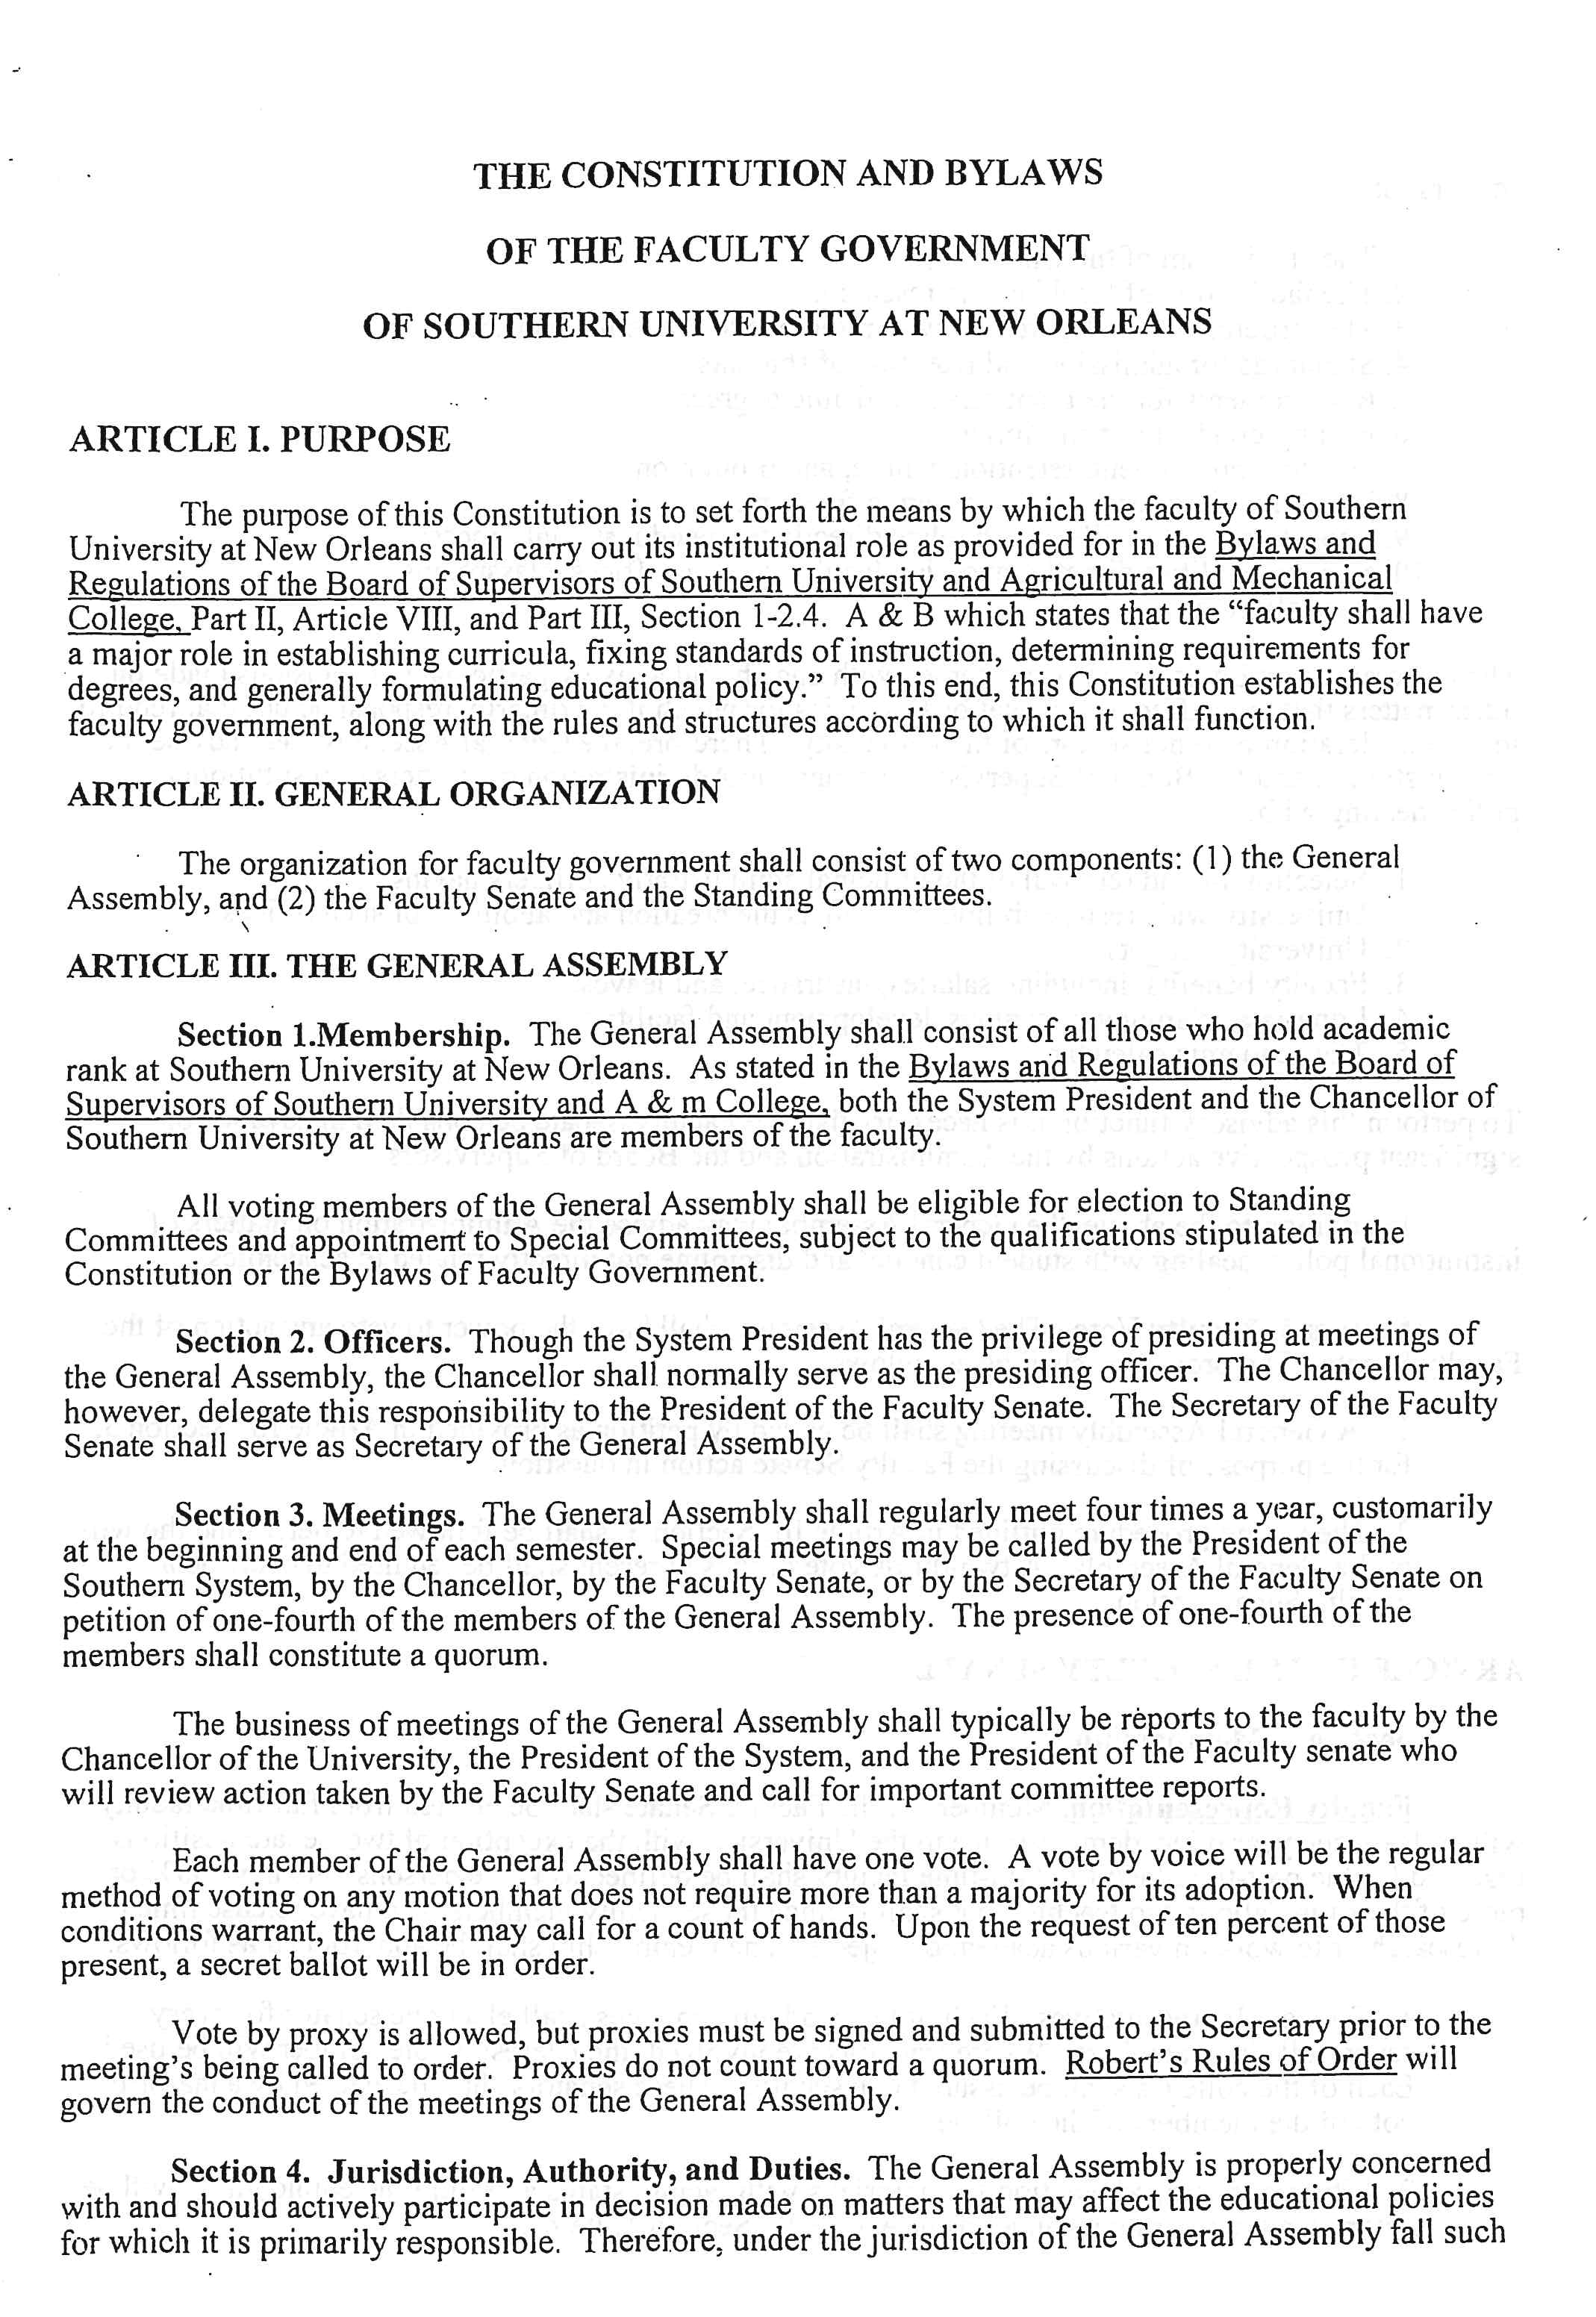 Constitution and Bylaws - Page 1